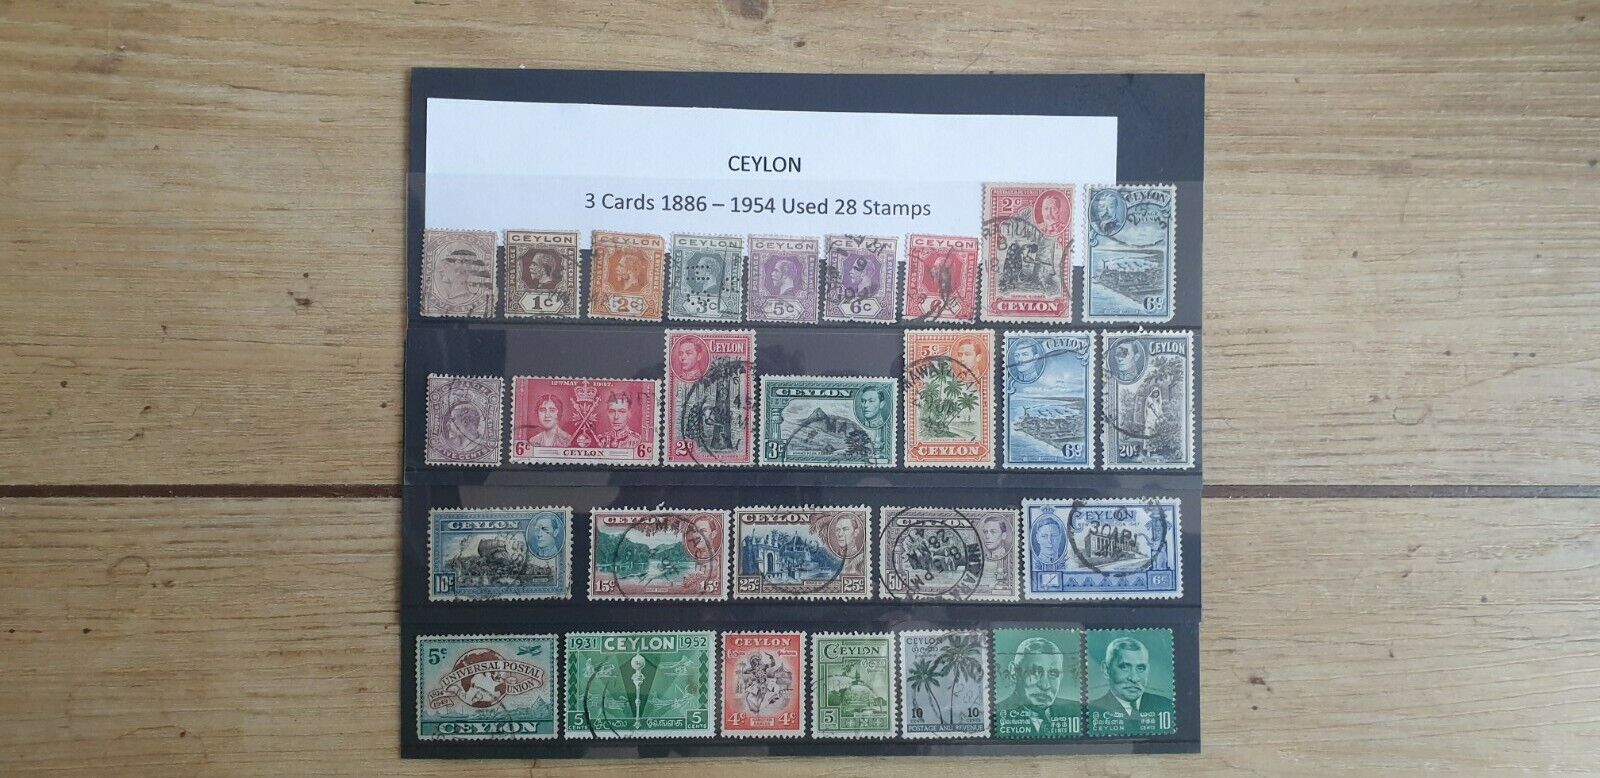 CEYLON STAMPS Las Vegas Be super welcome Mall